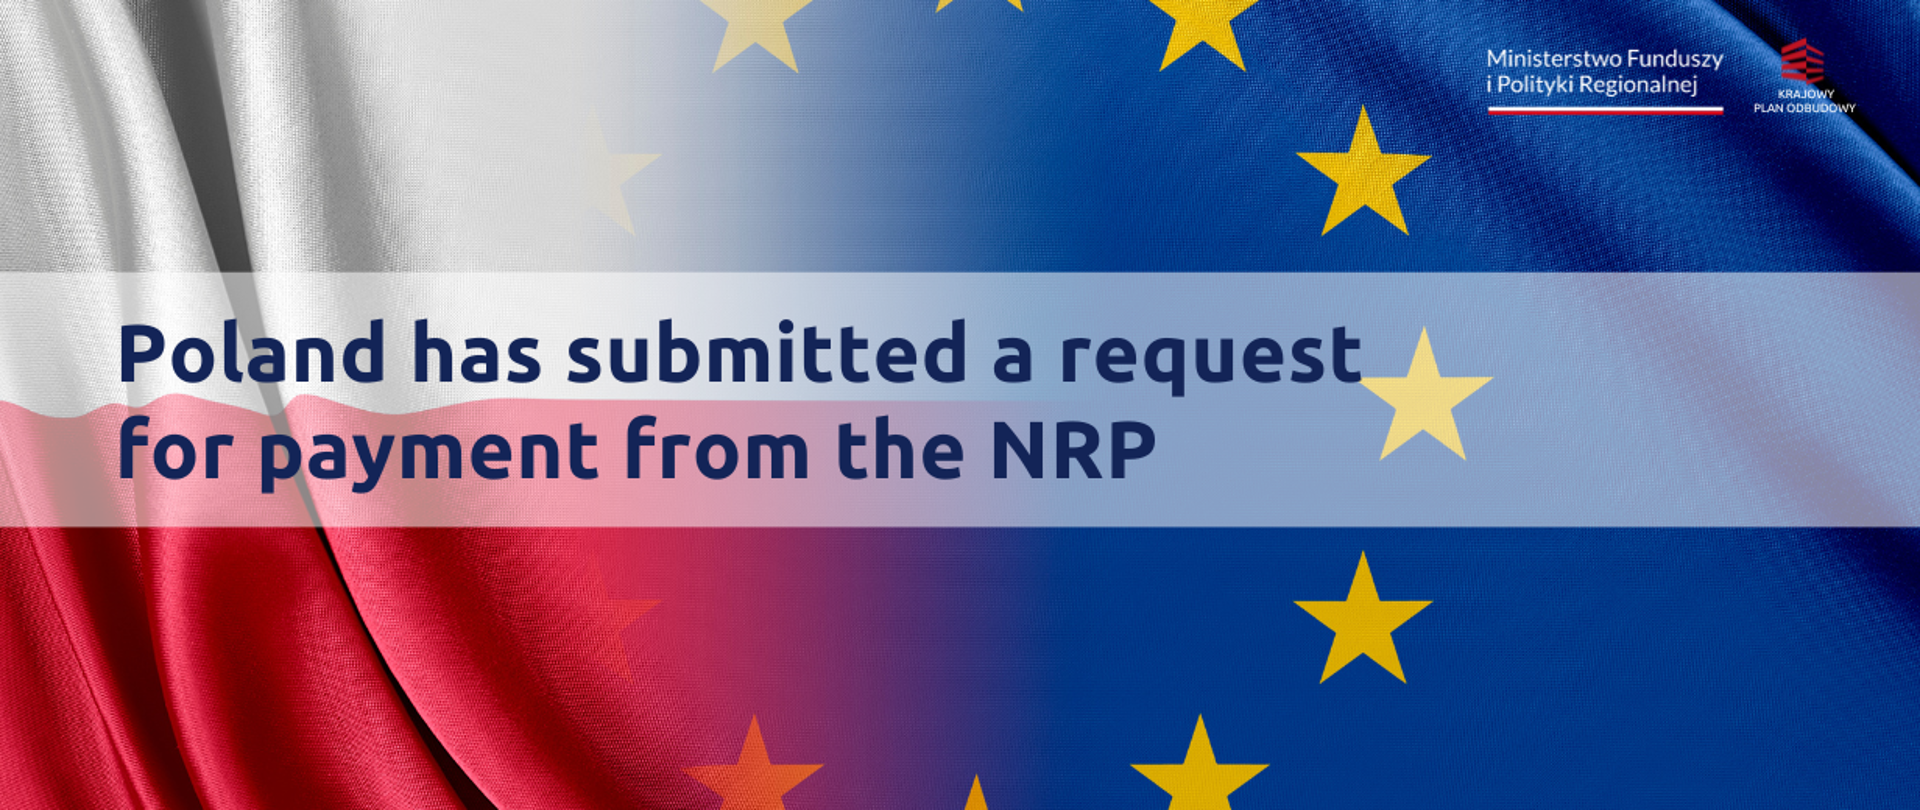 Poland has submitted a request for payment from the NRP